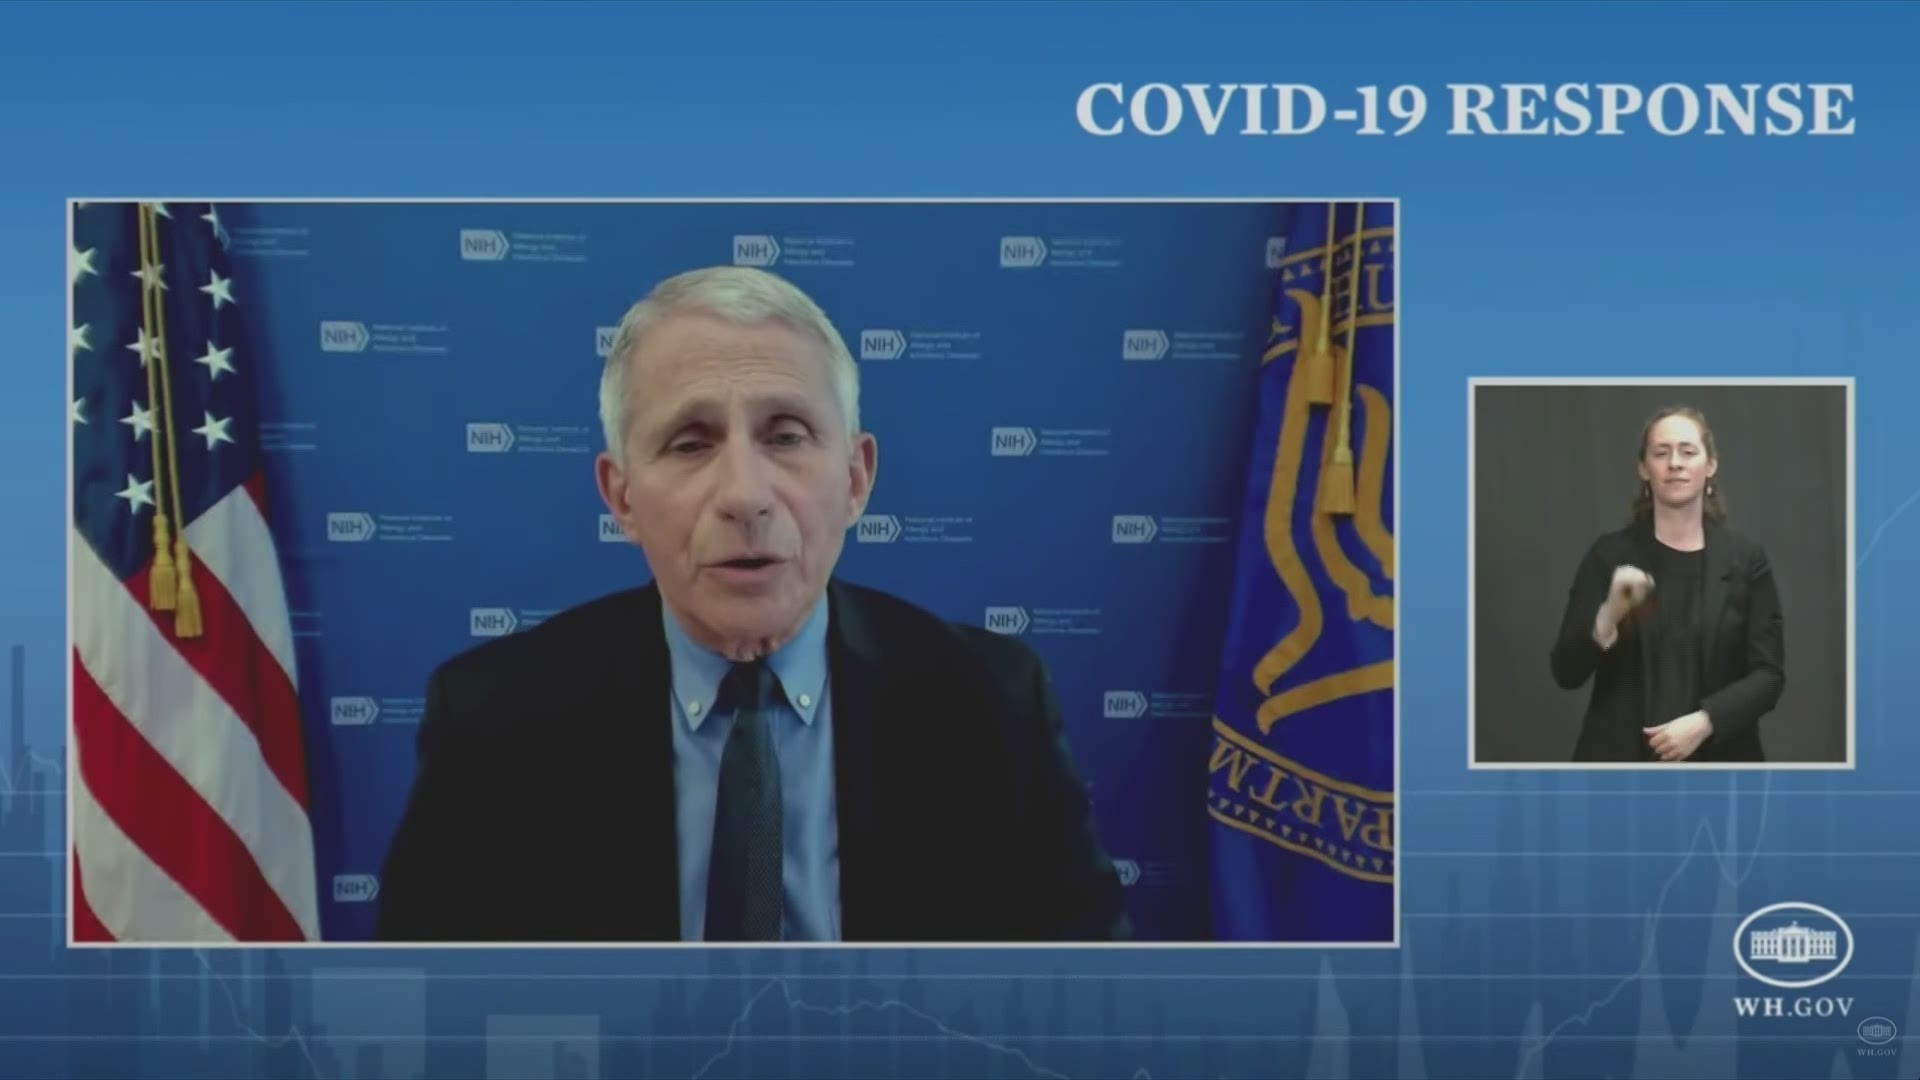 Dr. Fauci said Tuesday as the nation expected to see 50% of adults vaccinated across the country that studies show the vaccines work well against the virus.